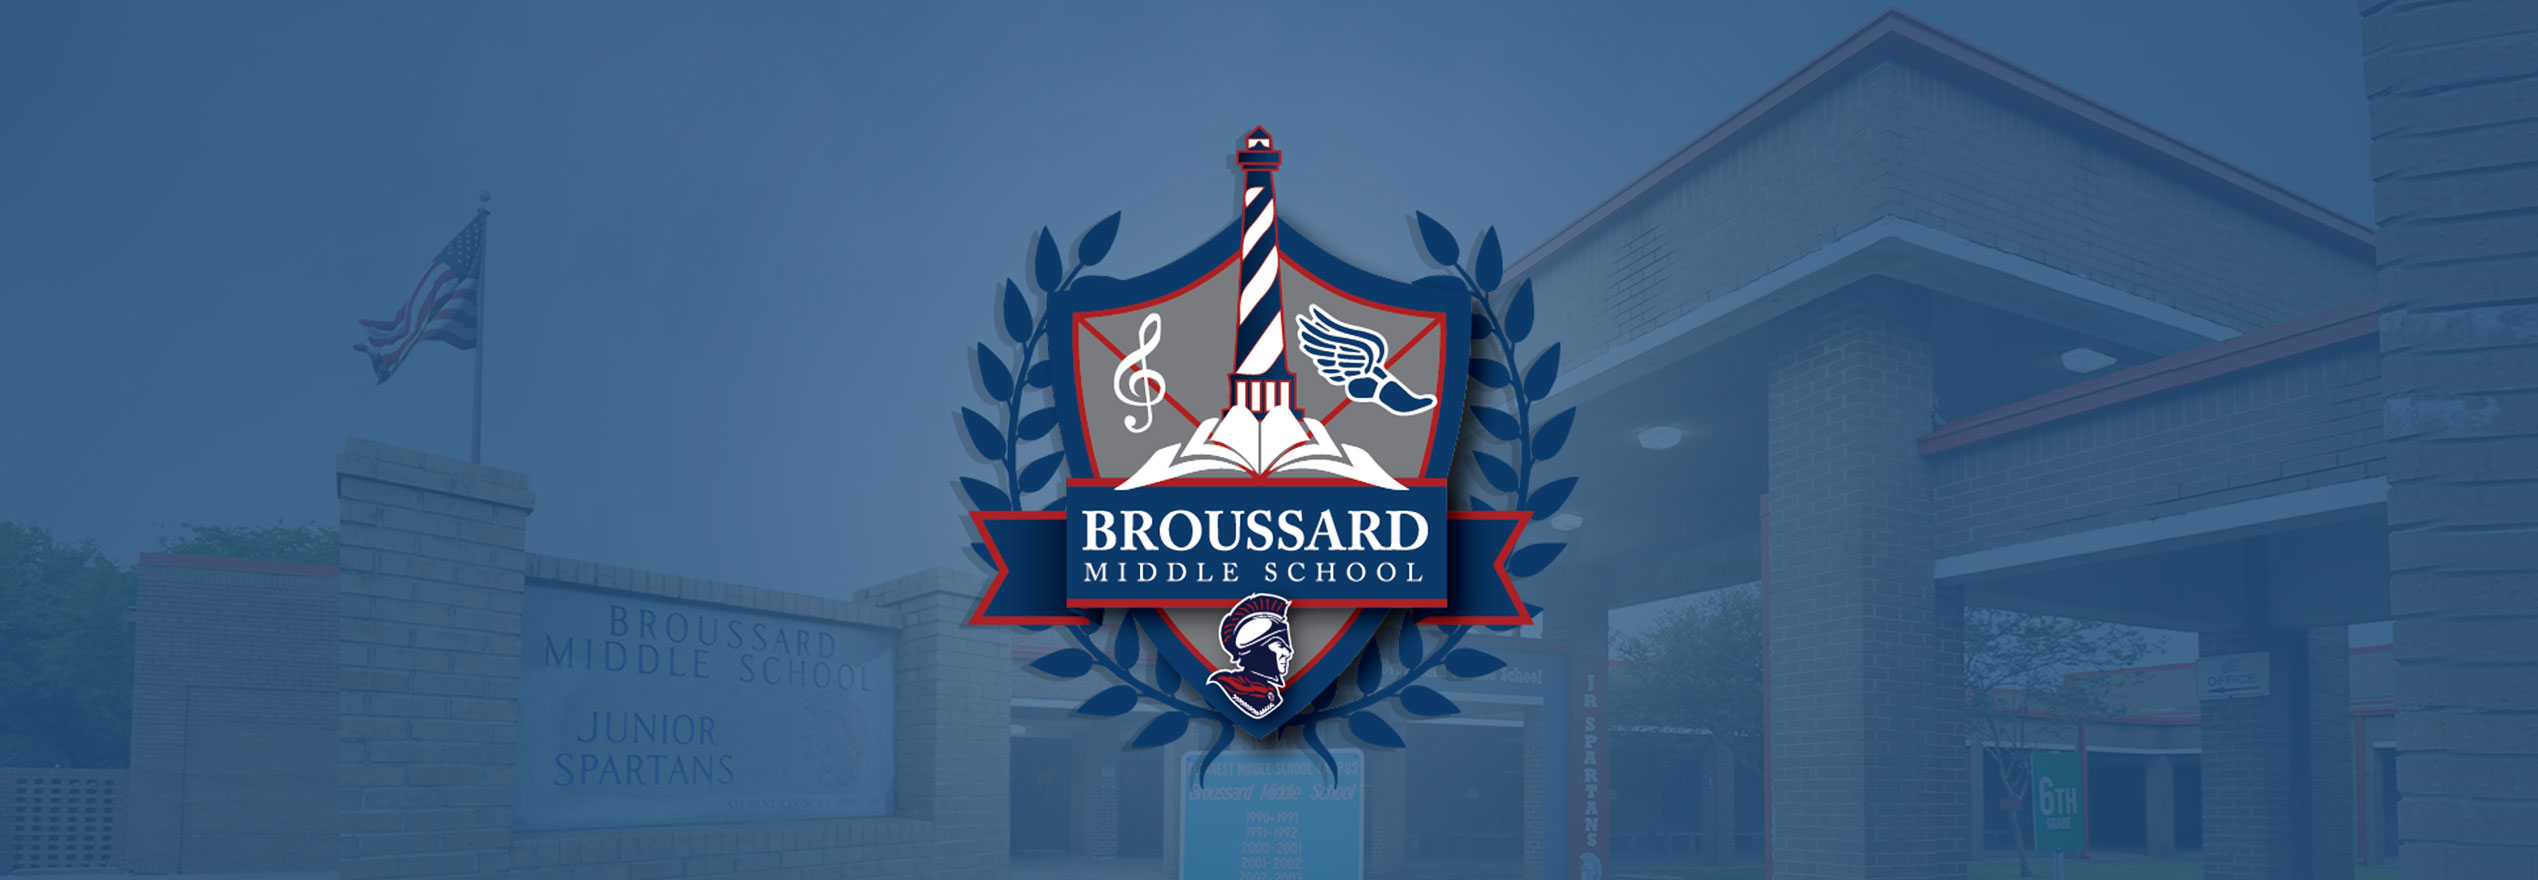 Broussard Middle School